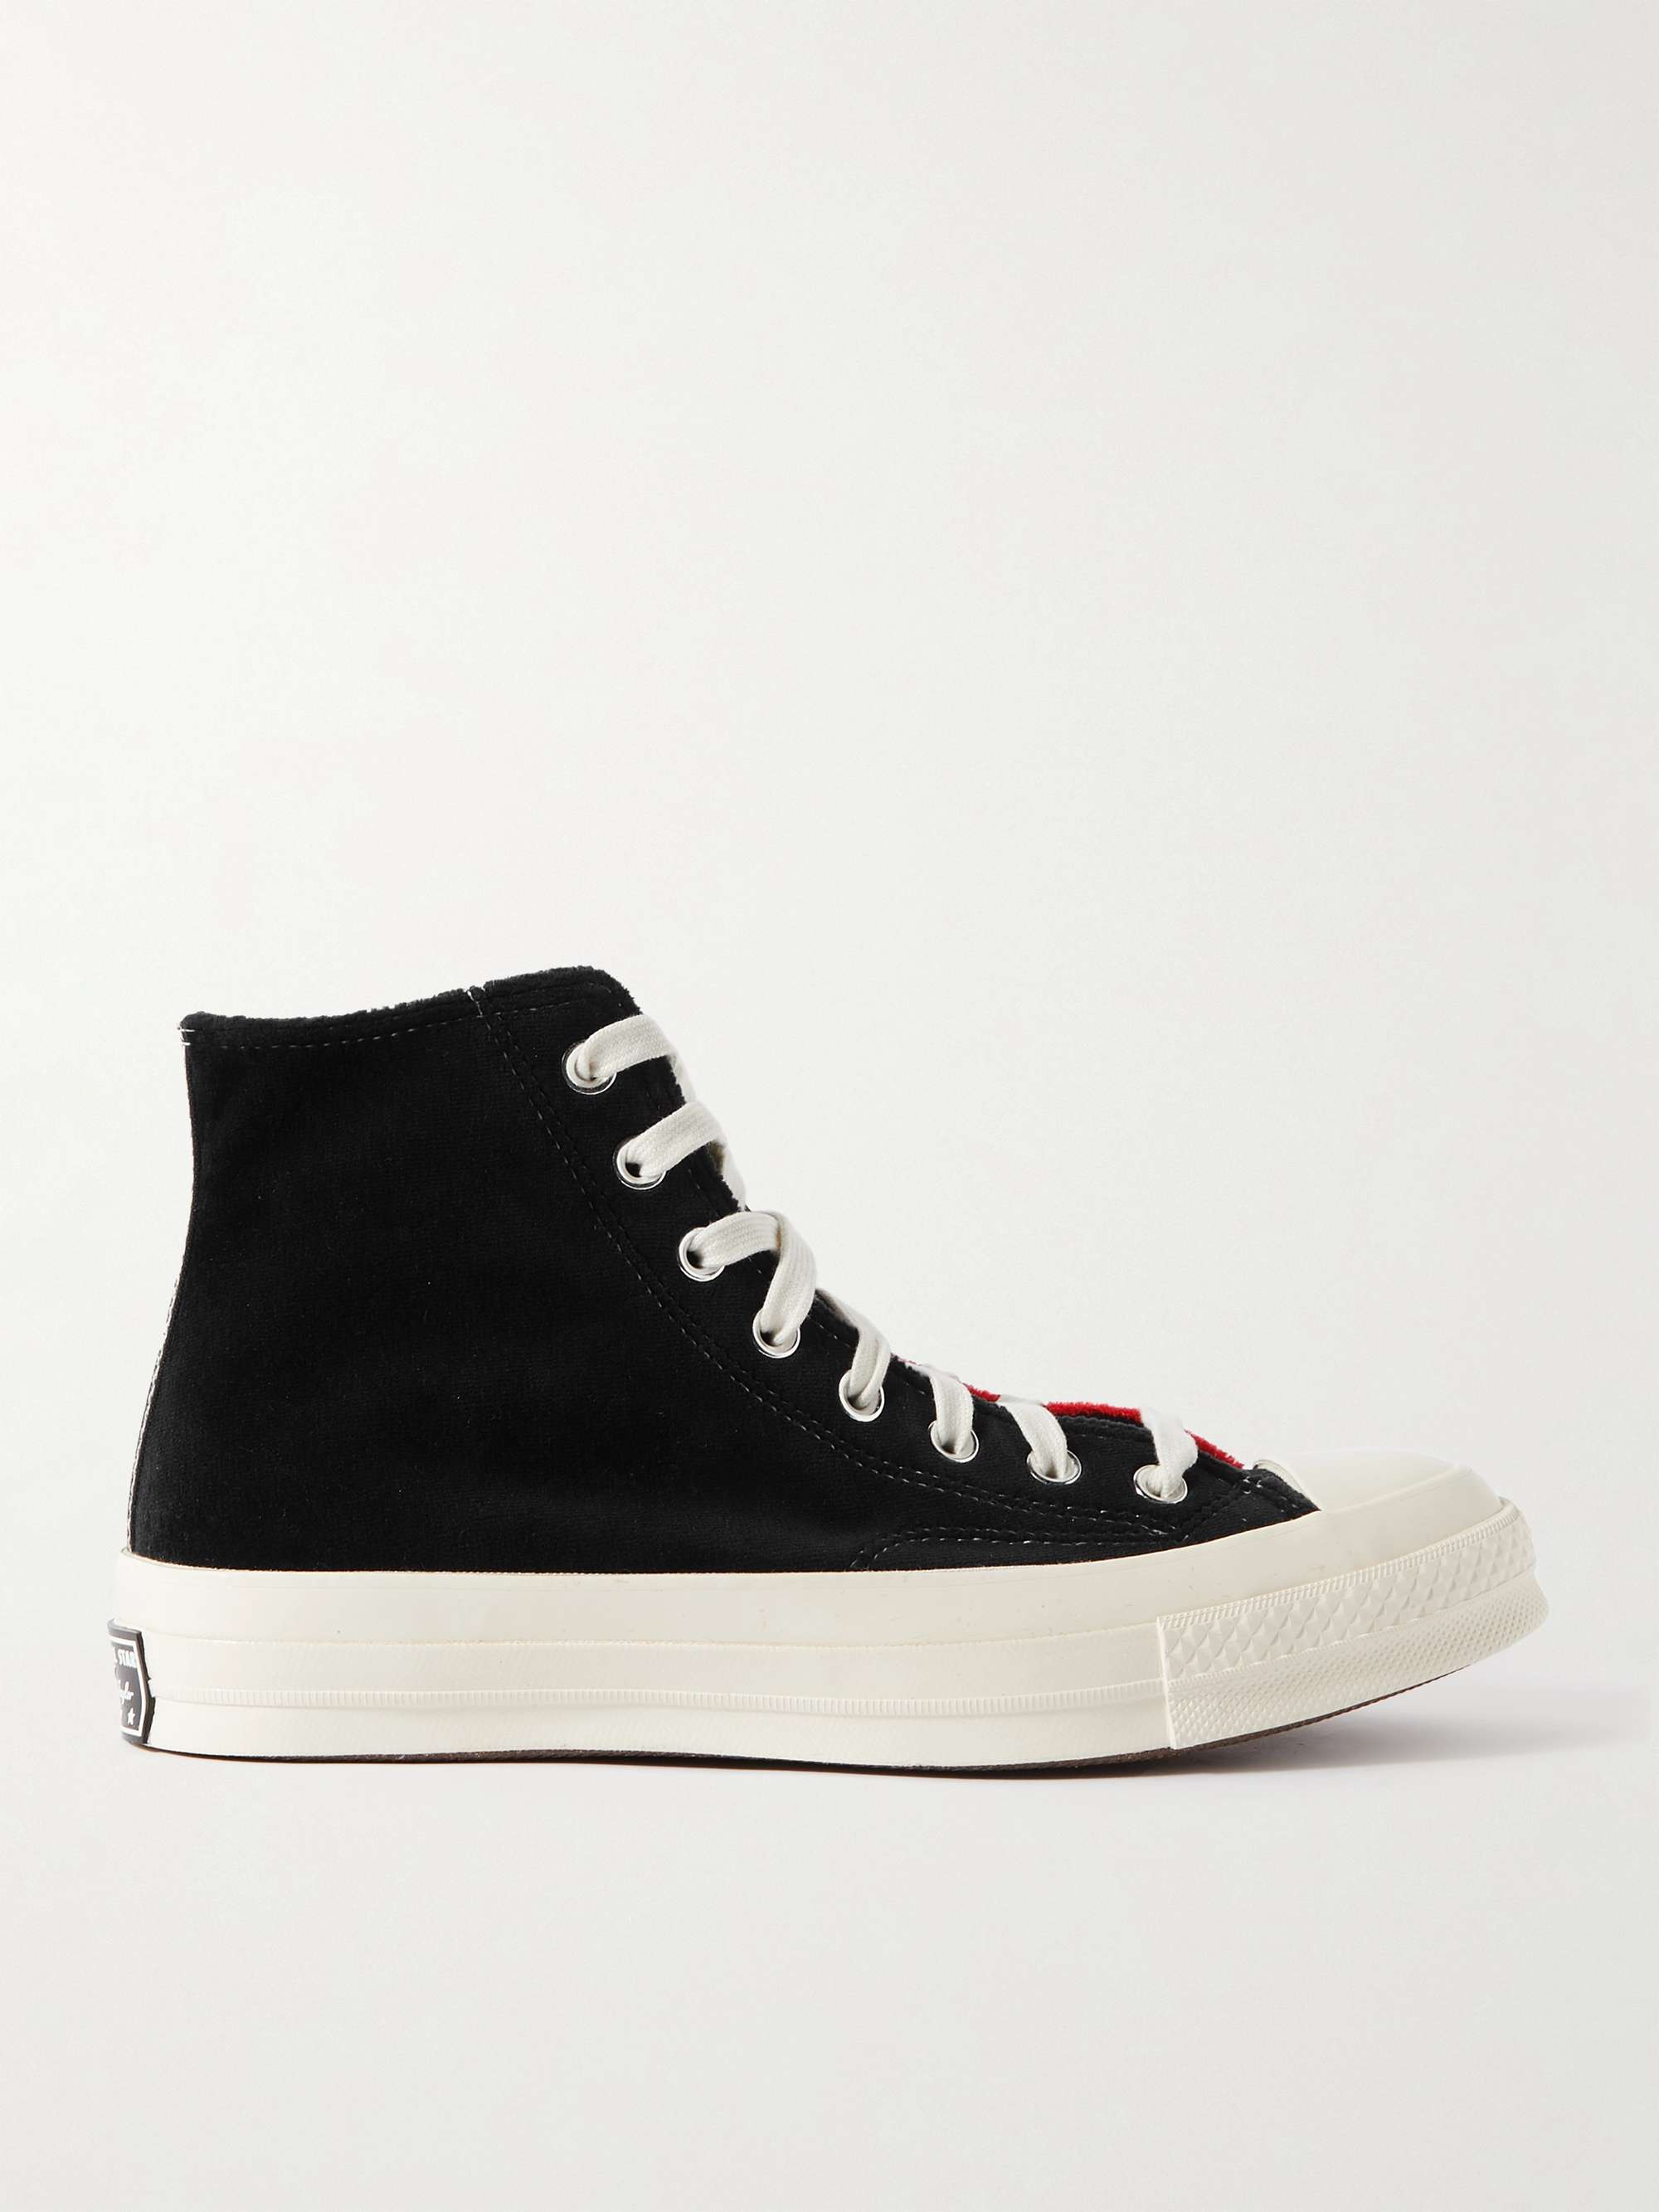 CONVERSE + Beyond Retro Chuck 70 Upcycled Two-Tone Velvet High-Top Sneakers